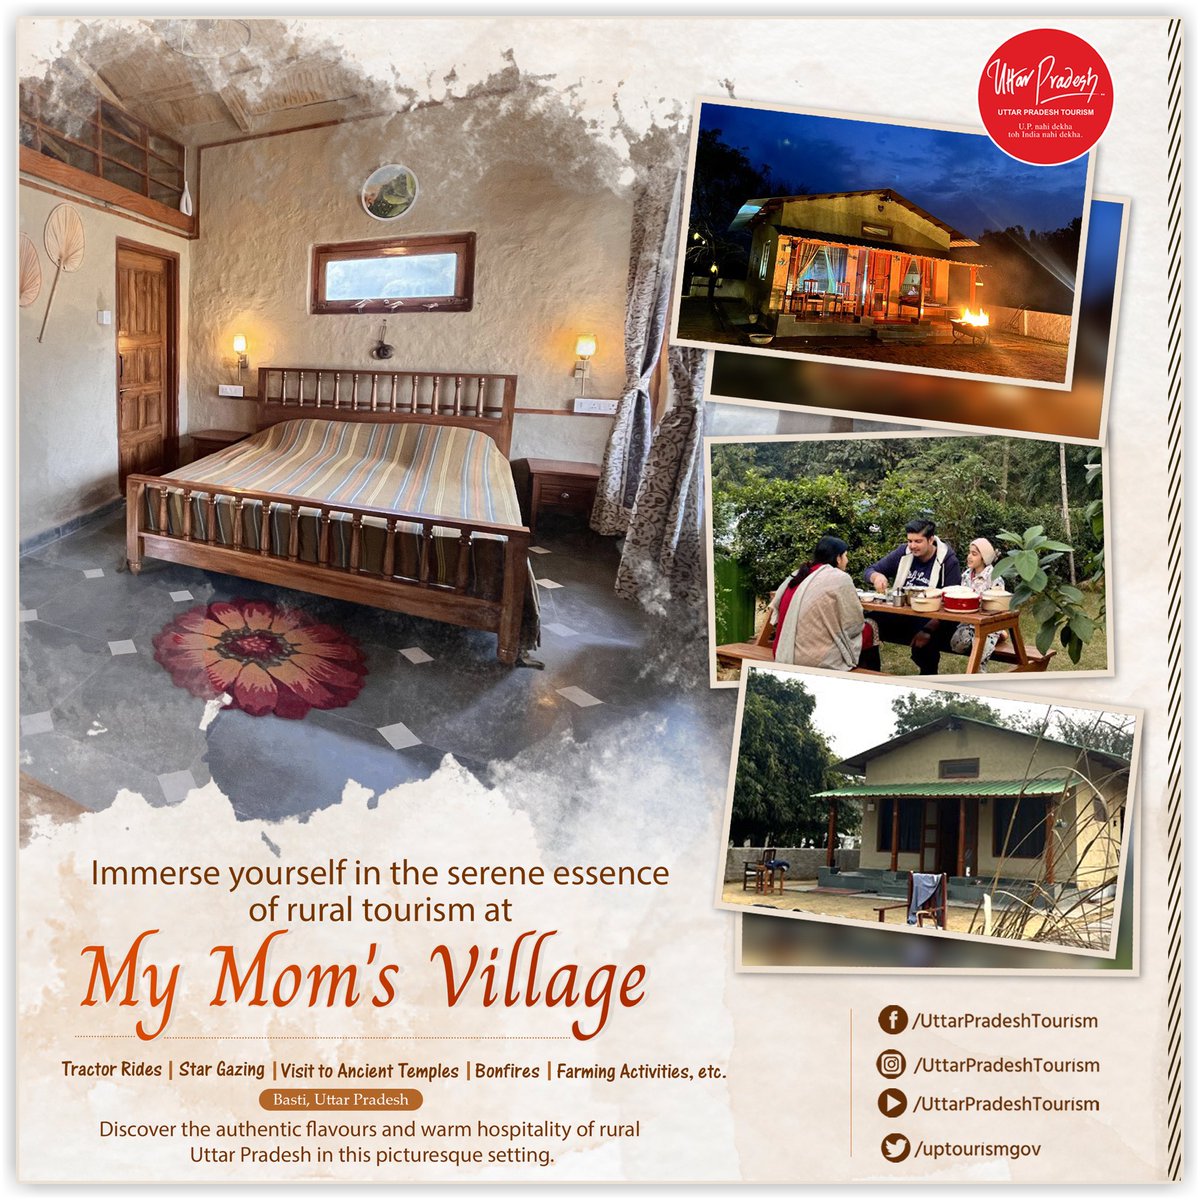 Immerse yourself in the serene essence of rural tourism at My Mom’s Village-Estate Shivpur and experience the charm of rural life through engaging activities such as graming, tractor rides, and bonfires.